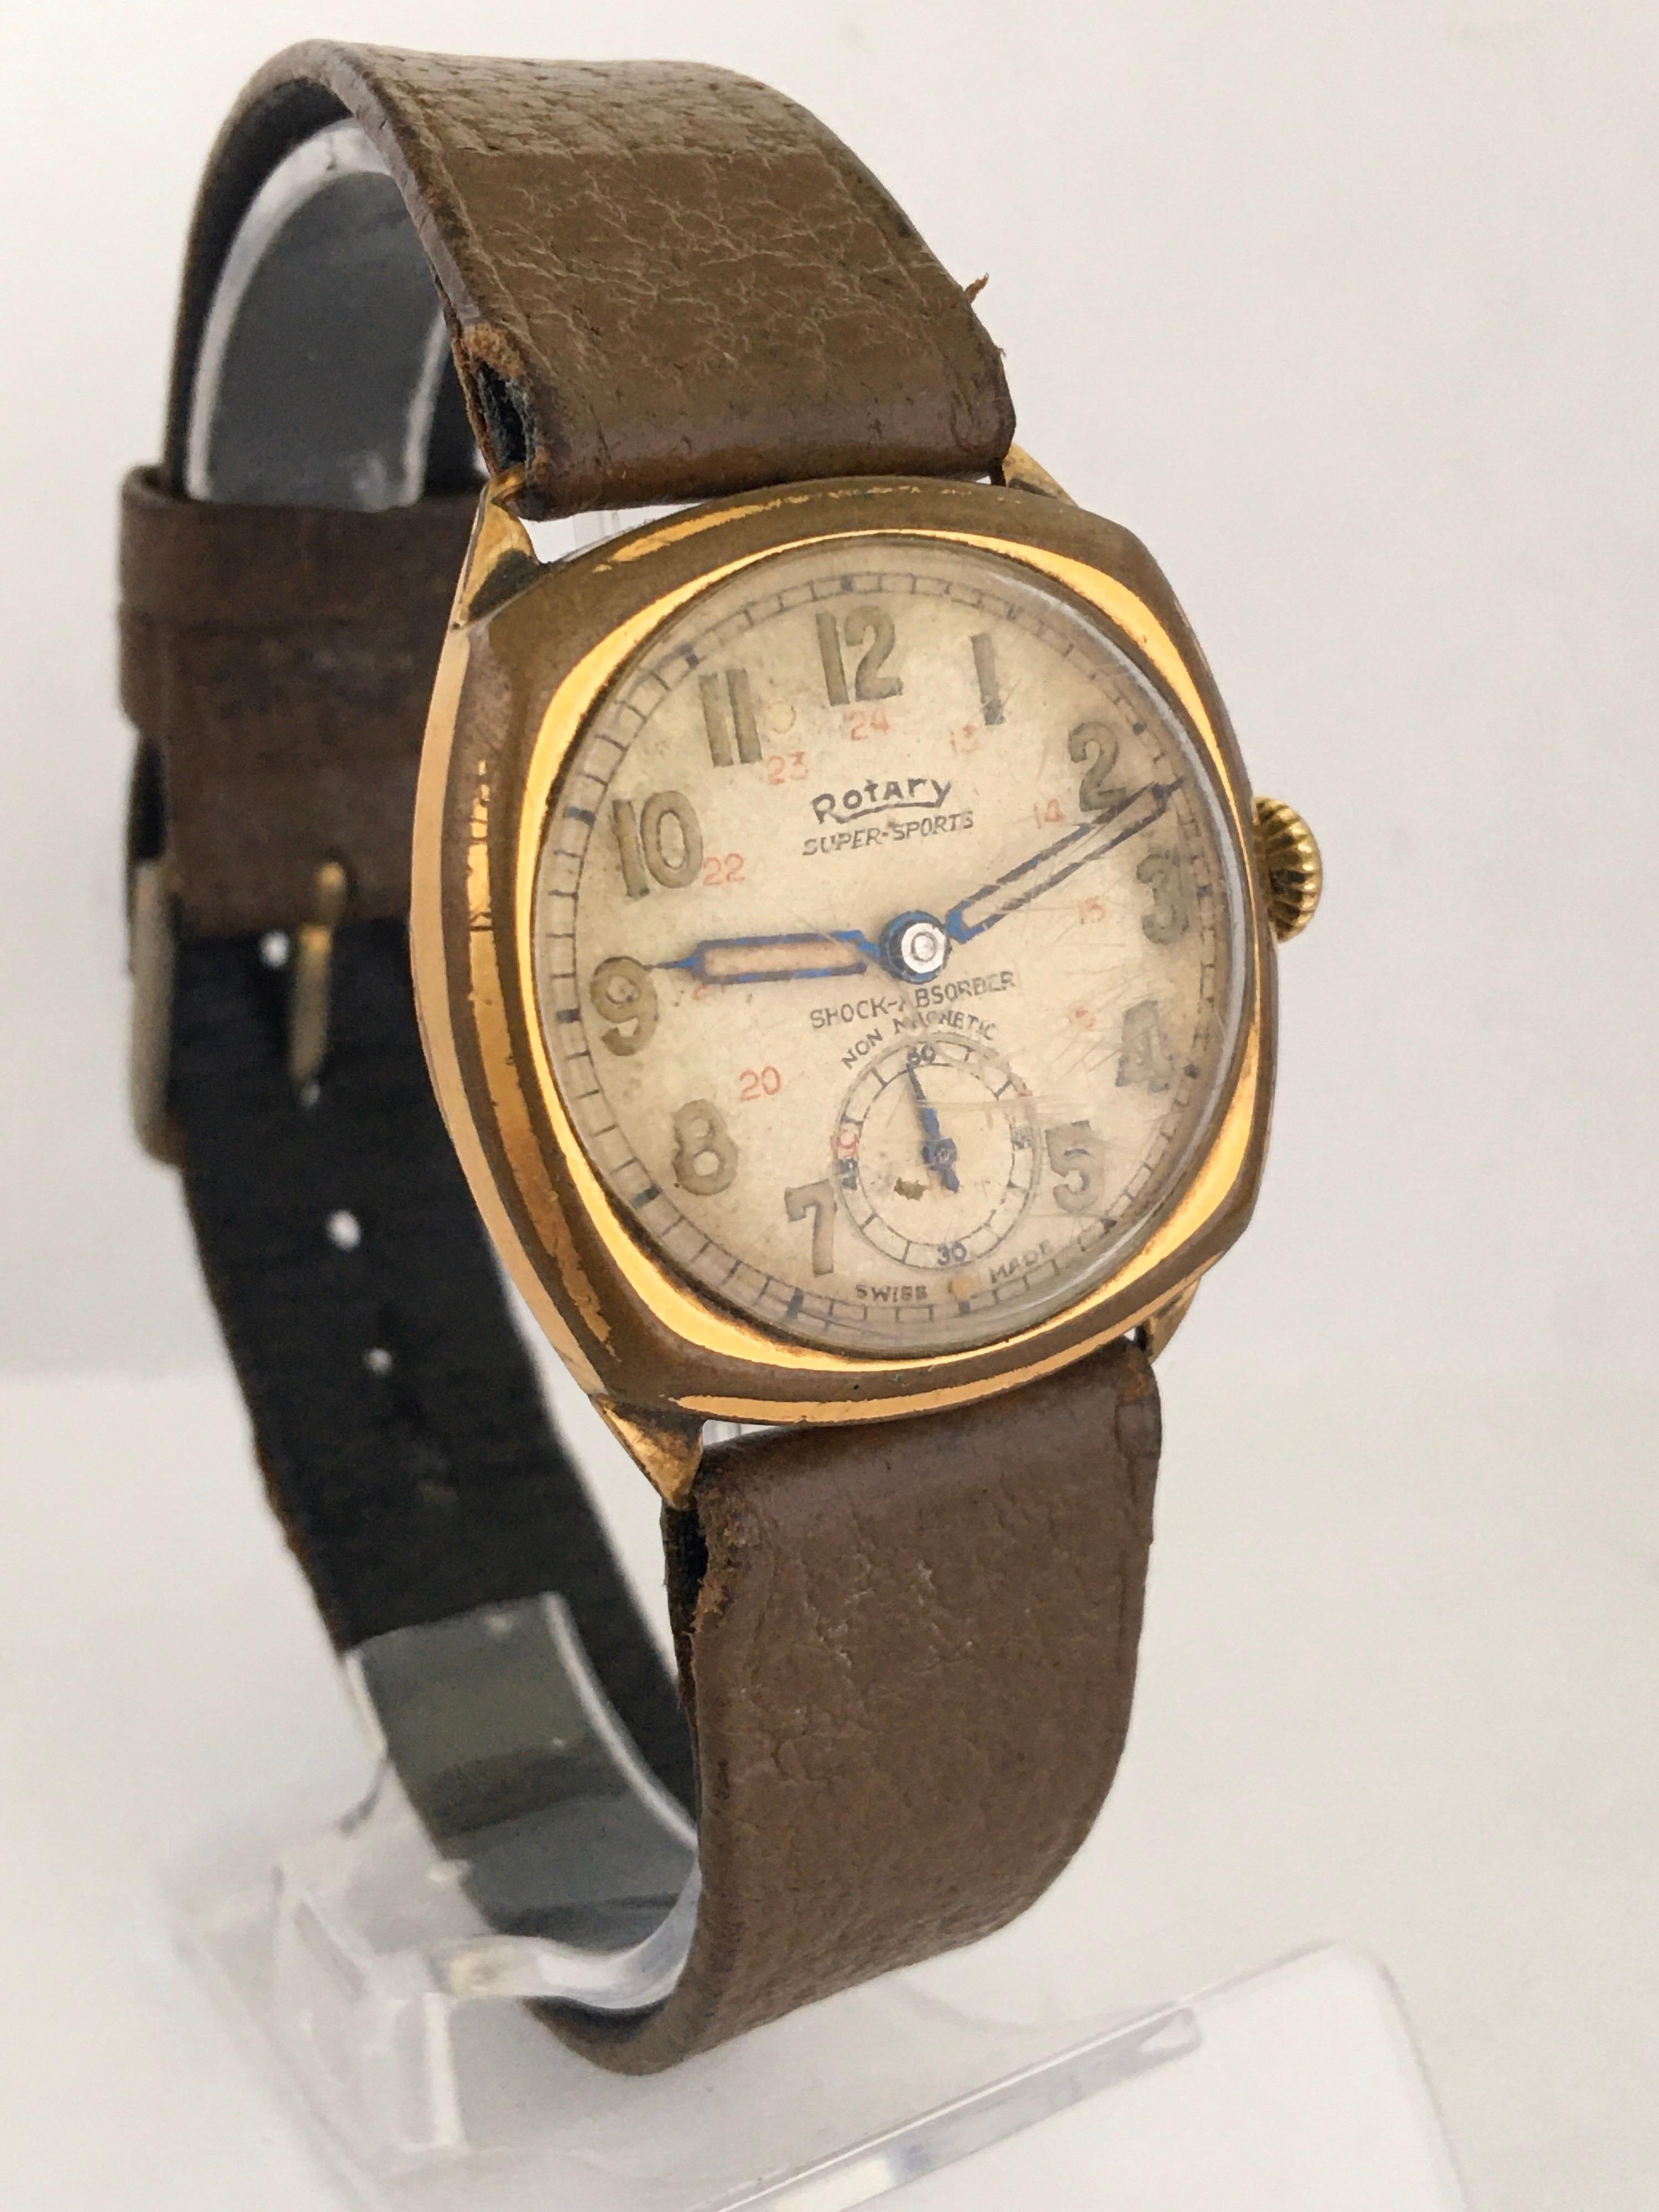 1930s Vintage Rotary24 Super Sports Gold-Plated Cushion Military Watch 6